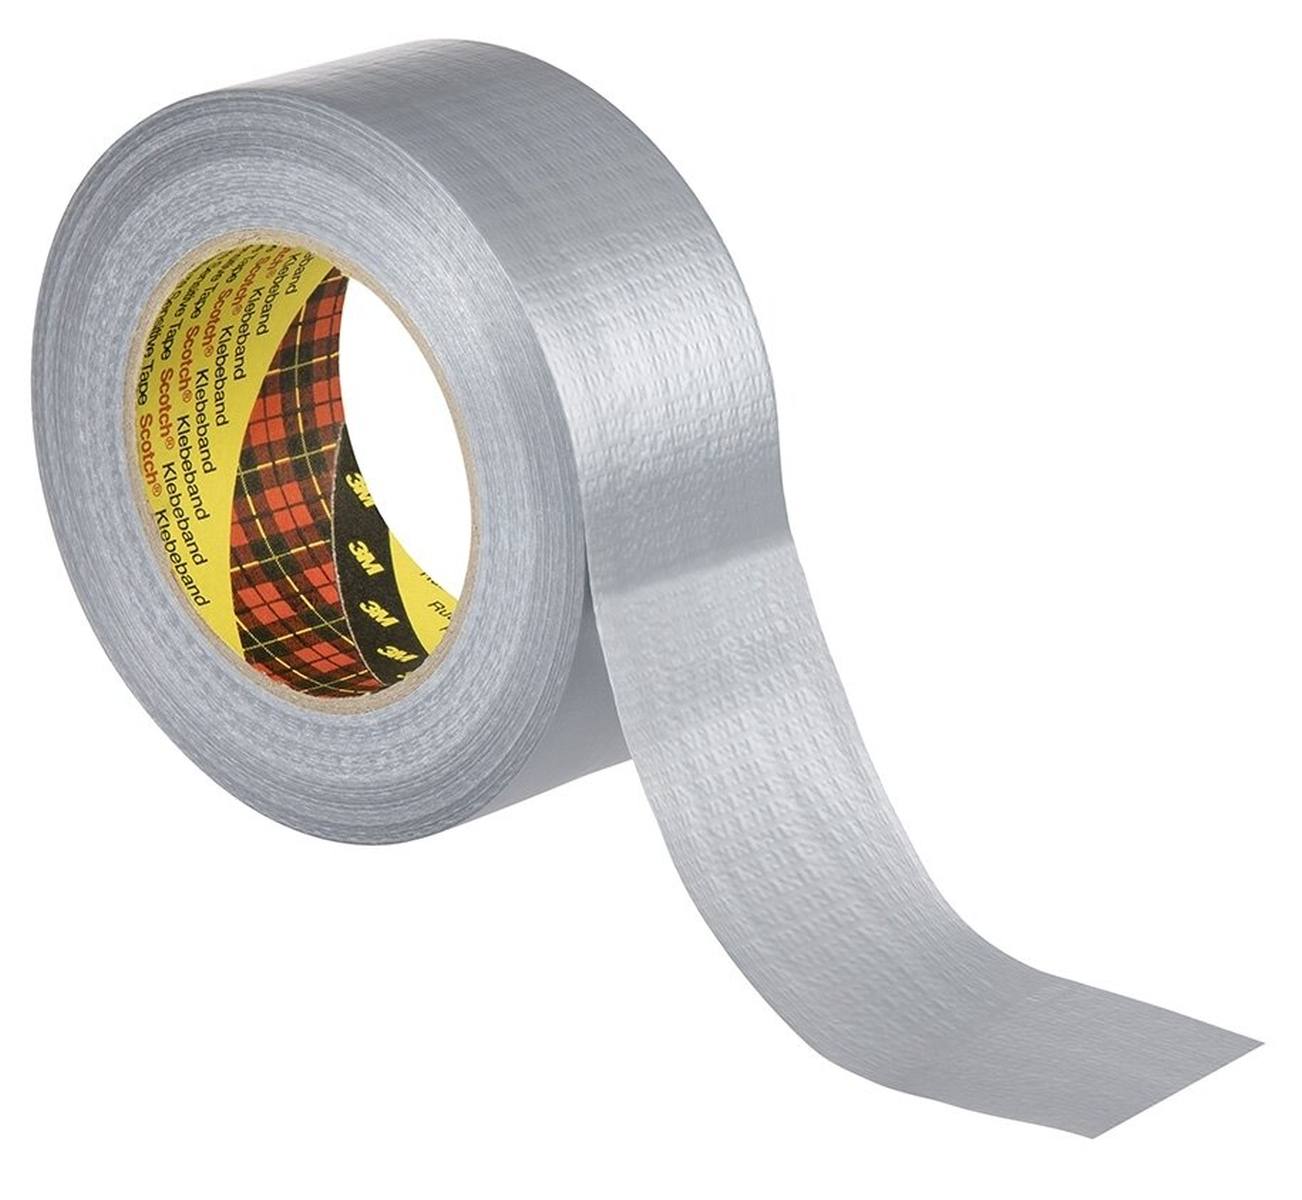 3M Fabric adhesive tape 2904, silver, 48mm x 50m, 0.19mm